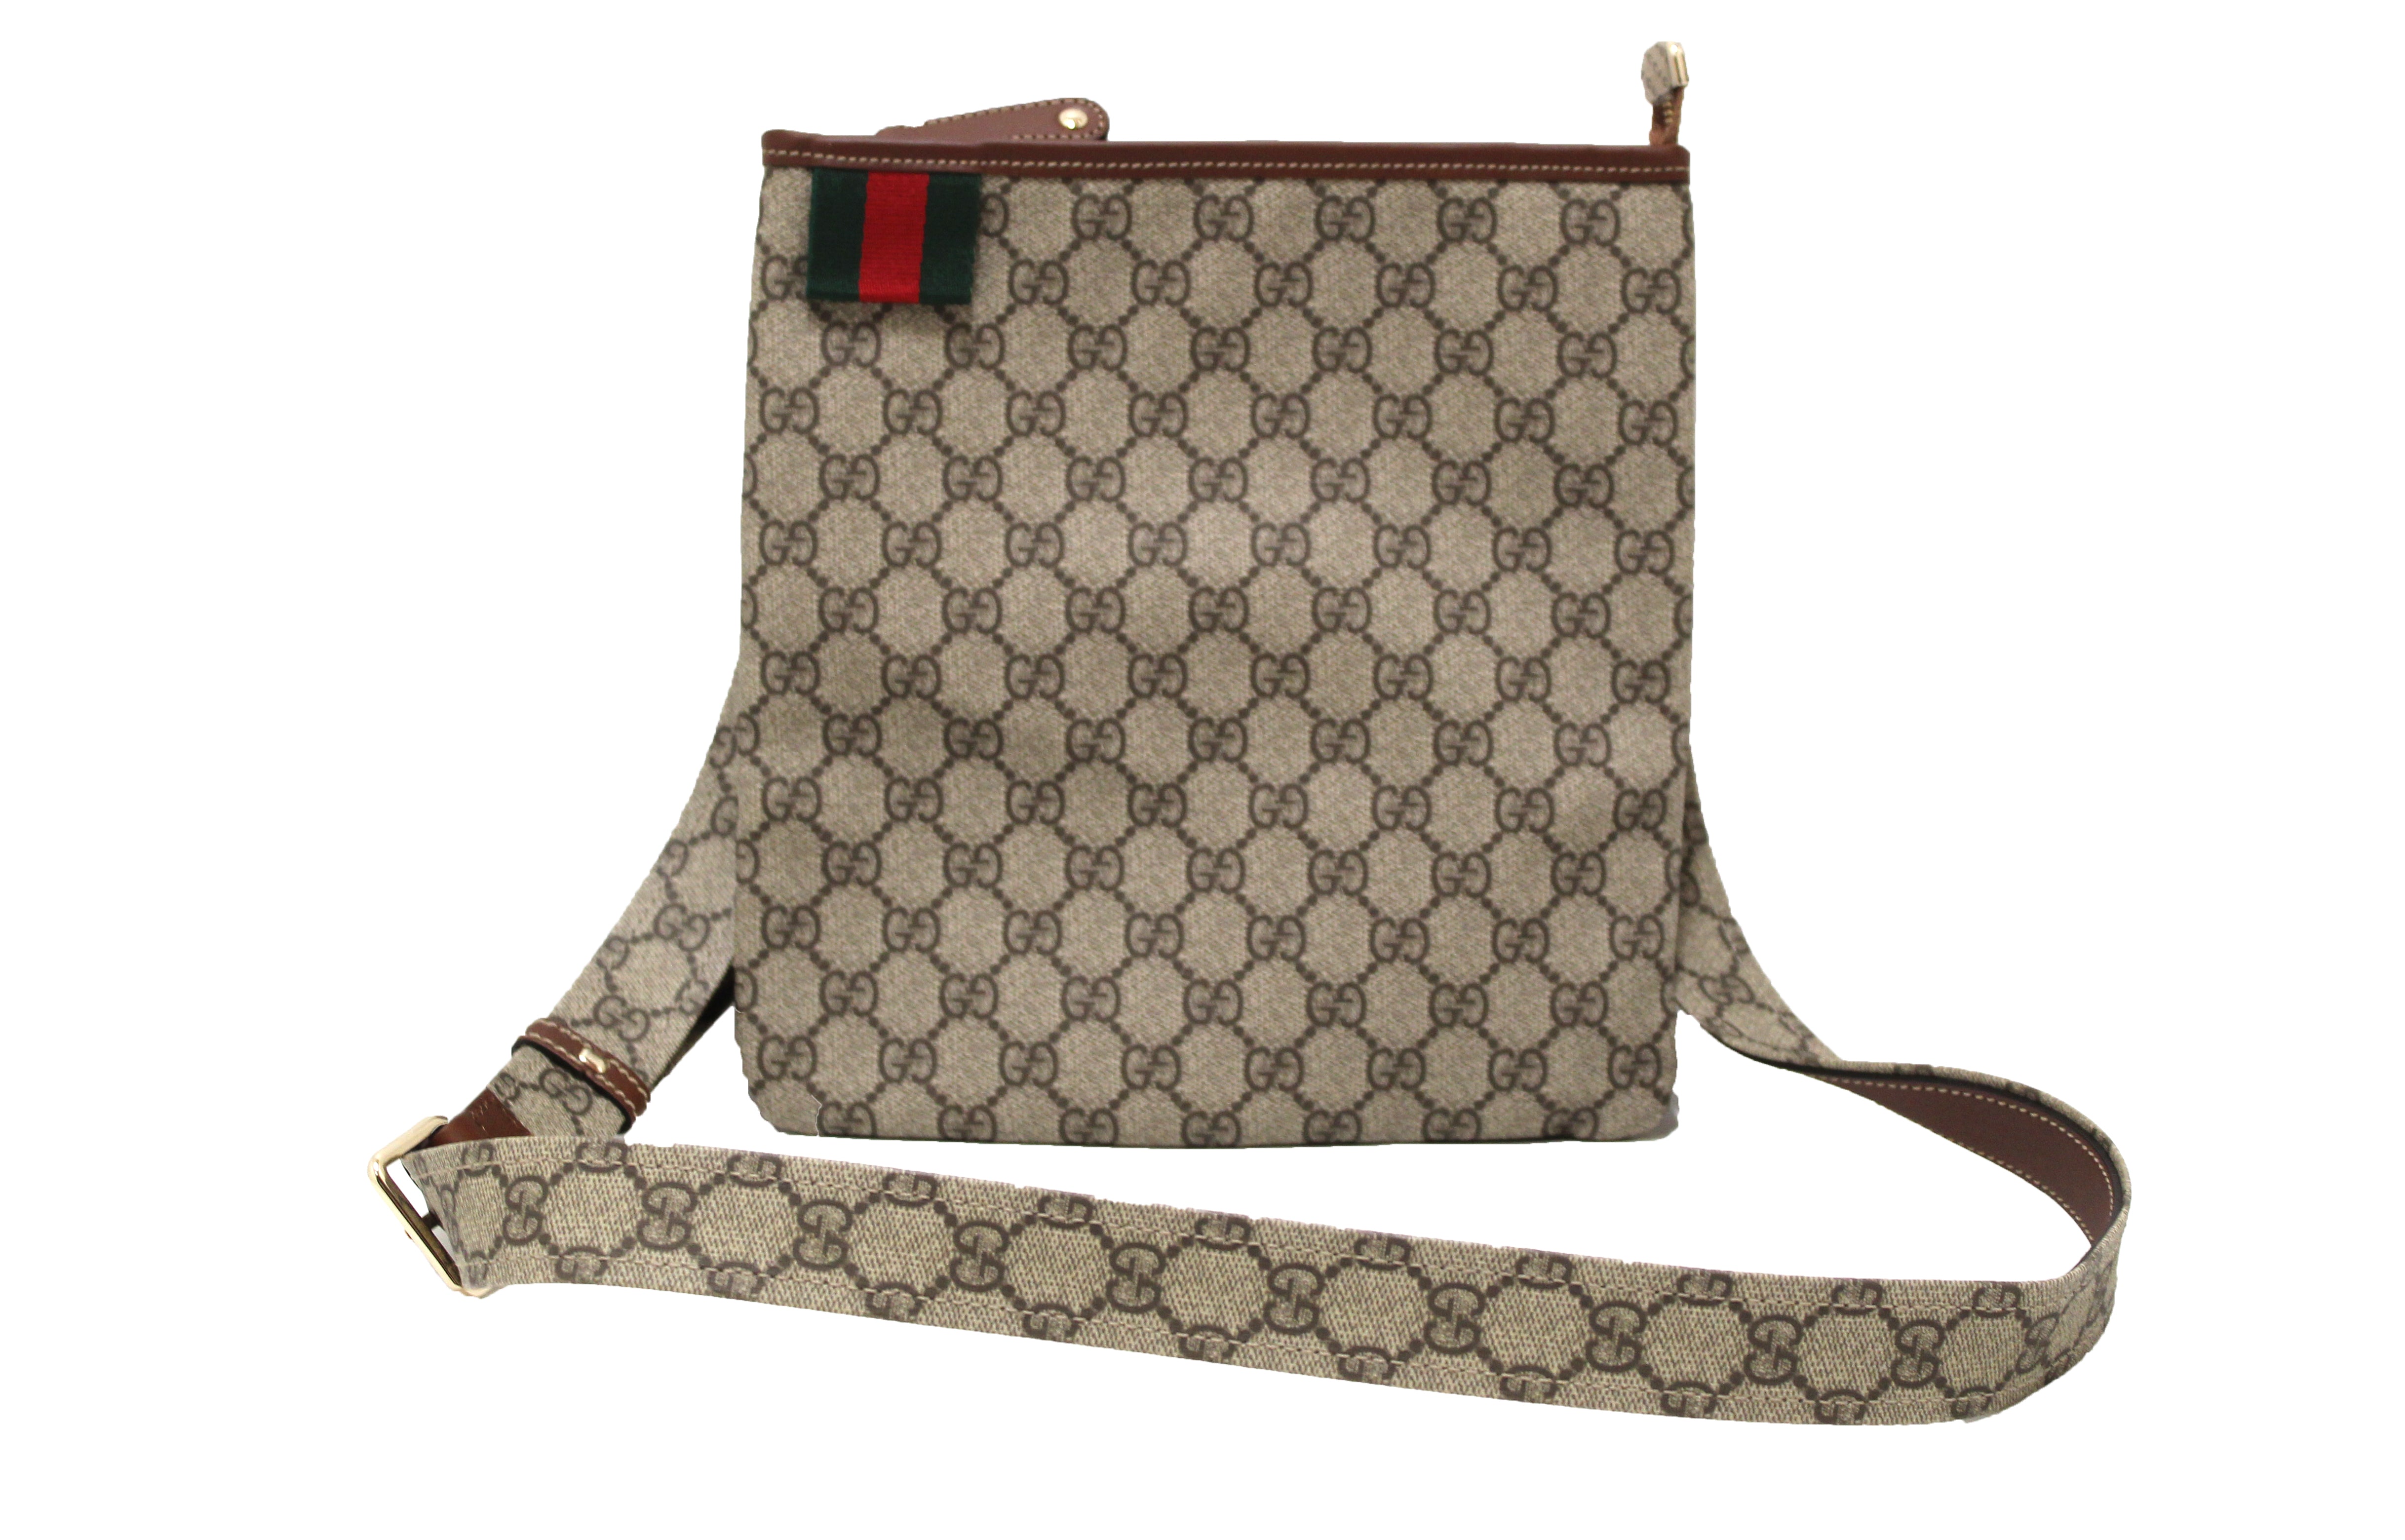 Gucci, Bags, Authentic Vintage Coated Gucci Crossbody